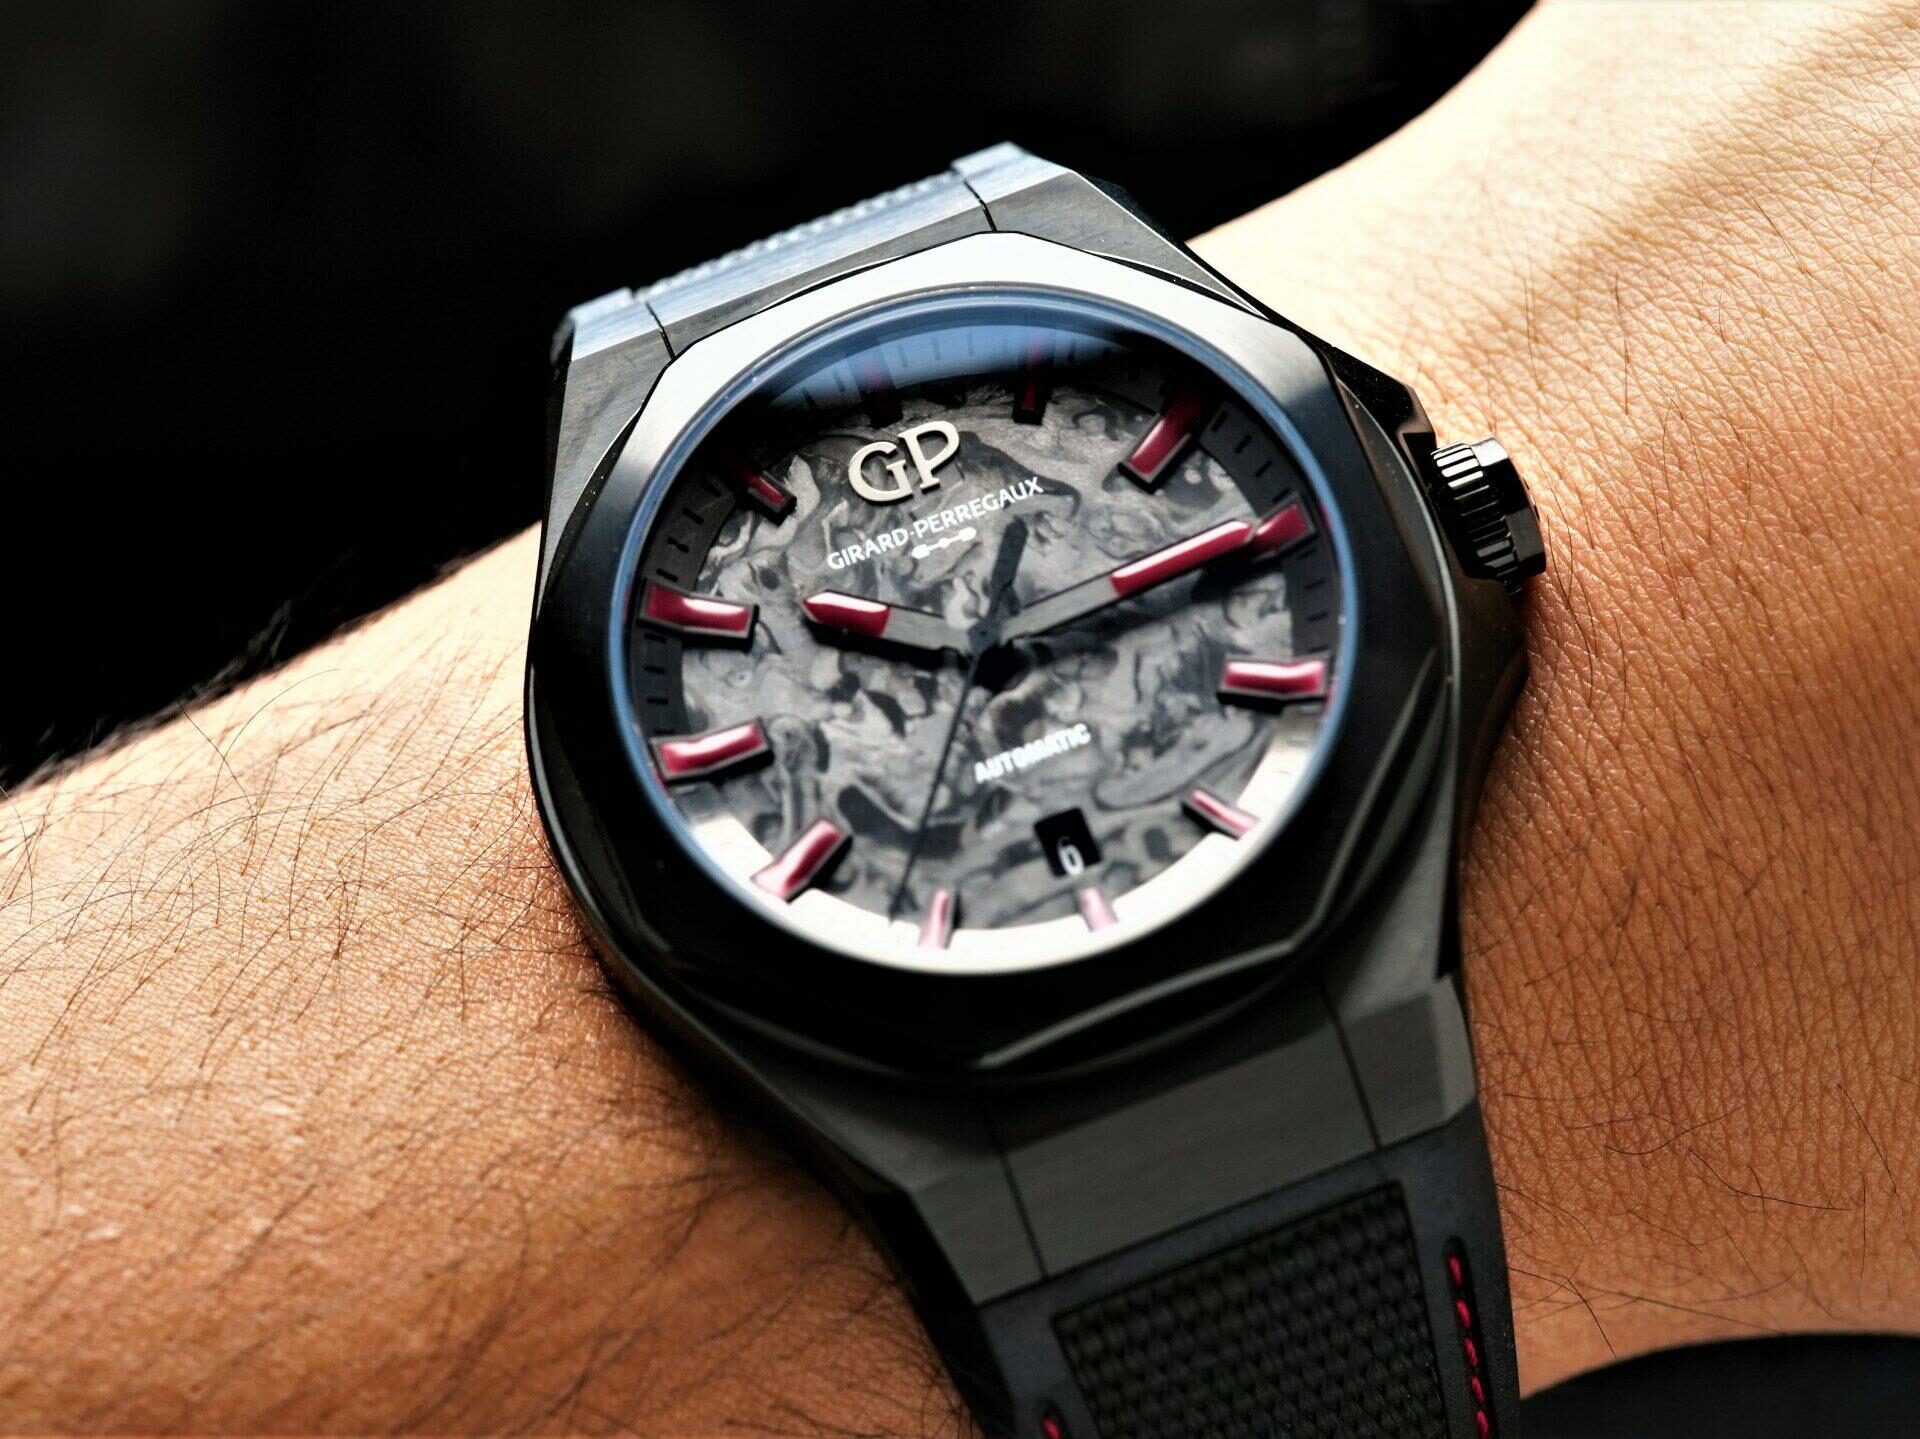 Girard Perregaux LIMITED EDITION OF 88 TIMEPIECES LAUREATO ABSOLUTE INFRARED